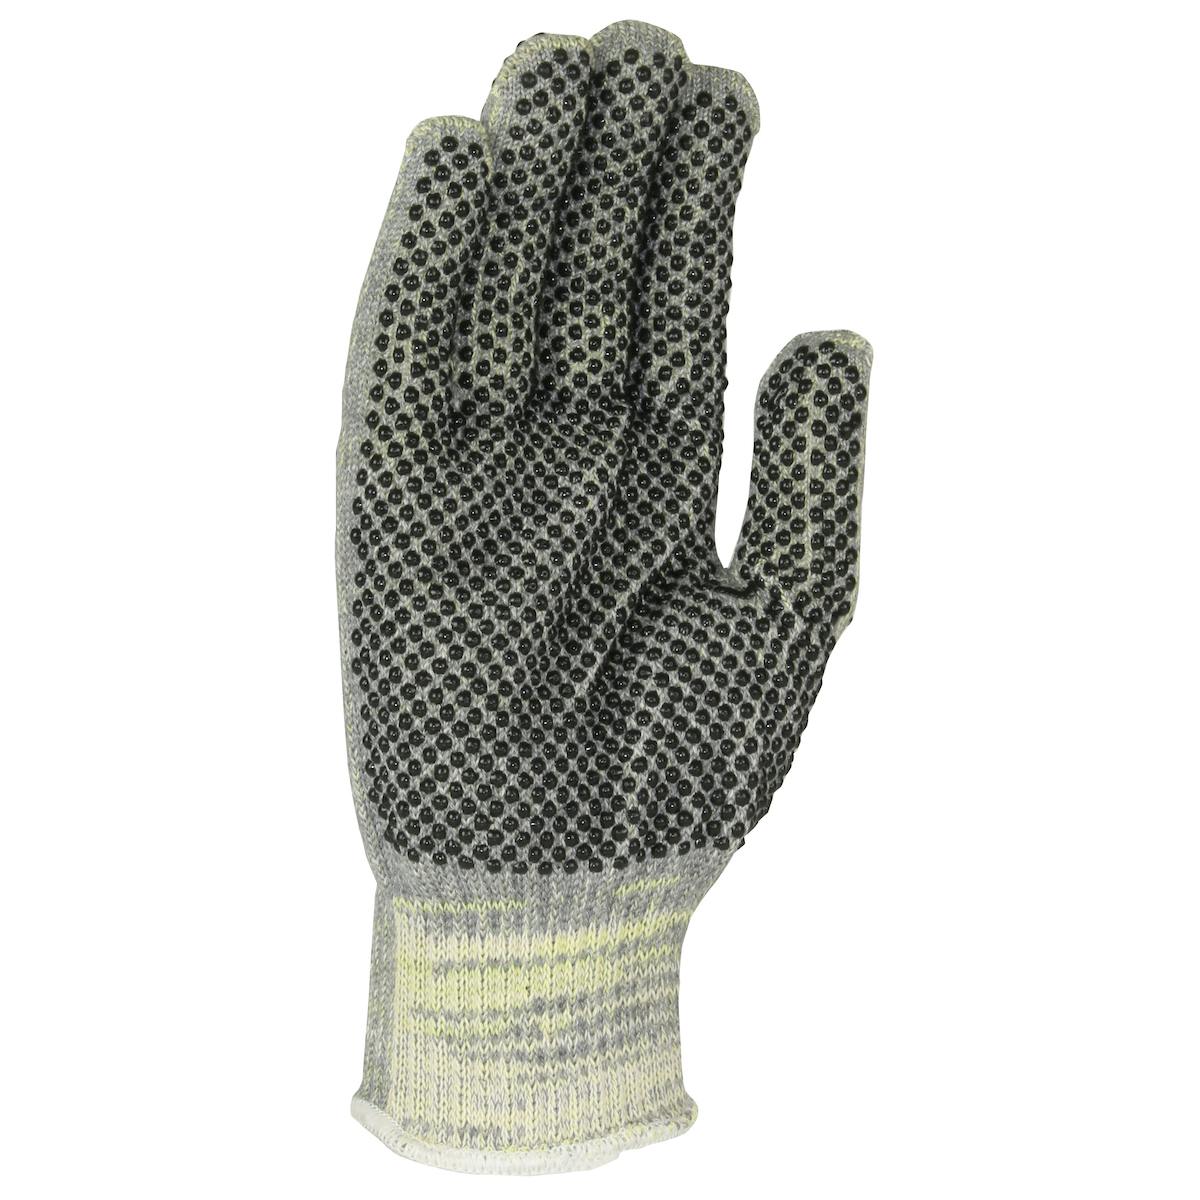 Kut Gard® Seamless Knit ATA® Blended Glove with Double-Sided PVC Dot Grip (MATA10-GY-PD2)_0